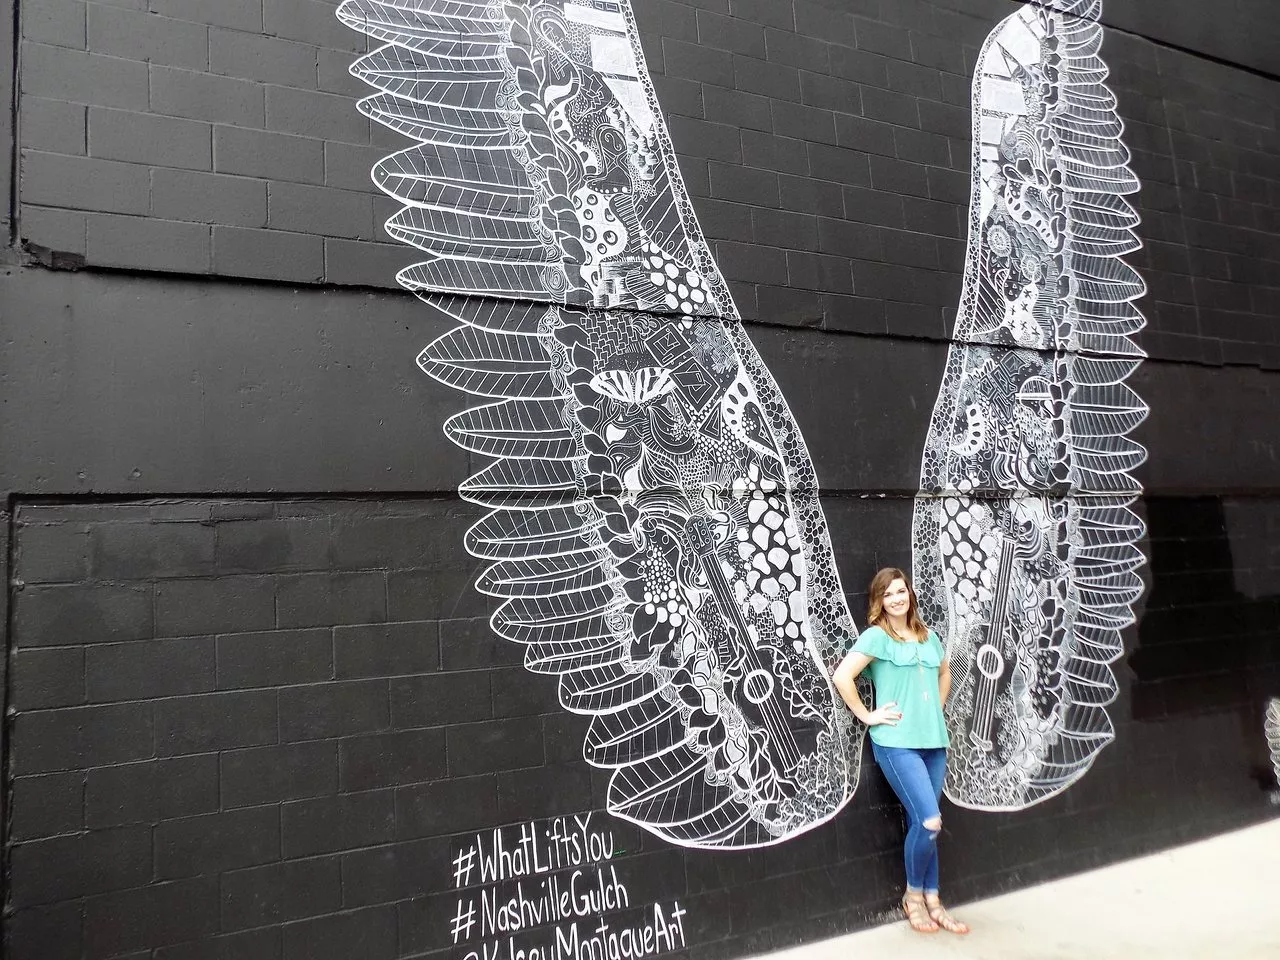 Nashville WhatLiftsYou Wings Mural in USA, North America | National Performing Arts - Rated 3.9